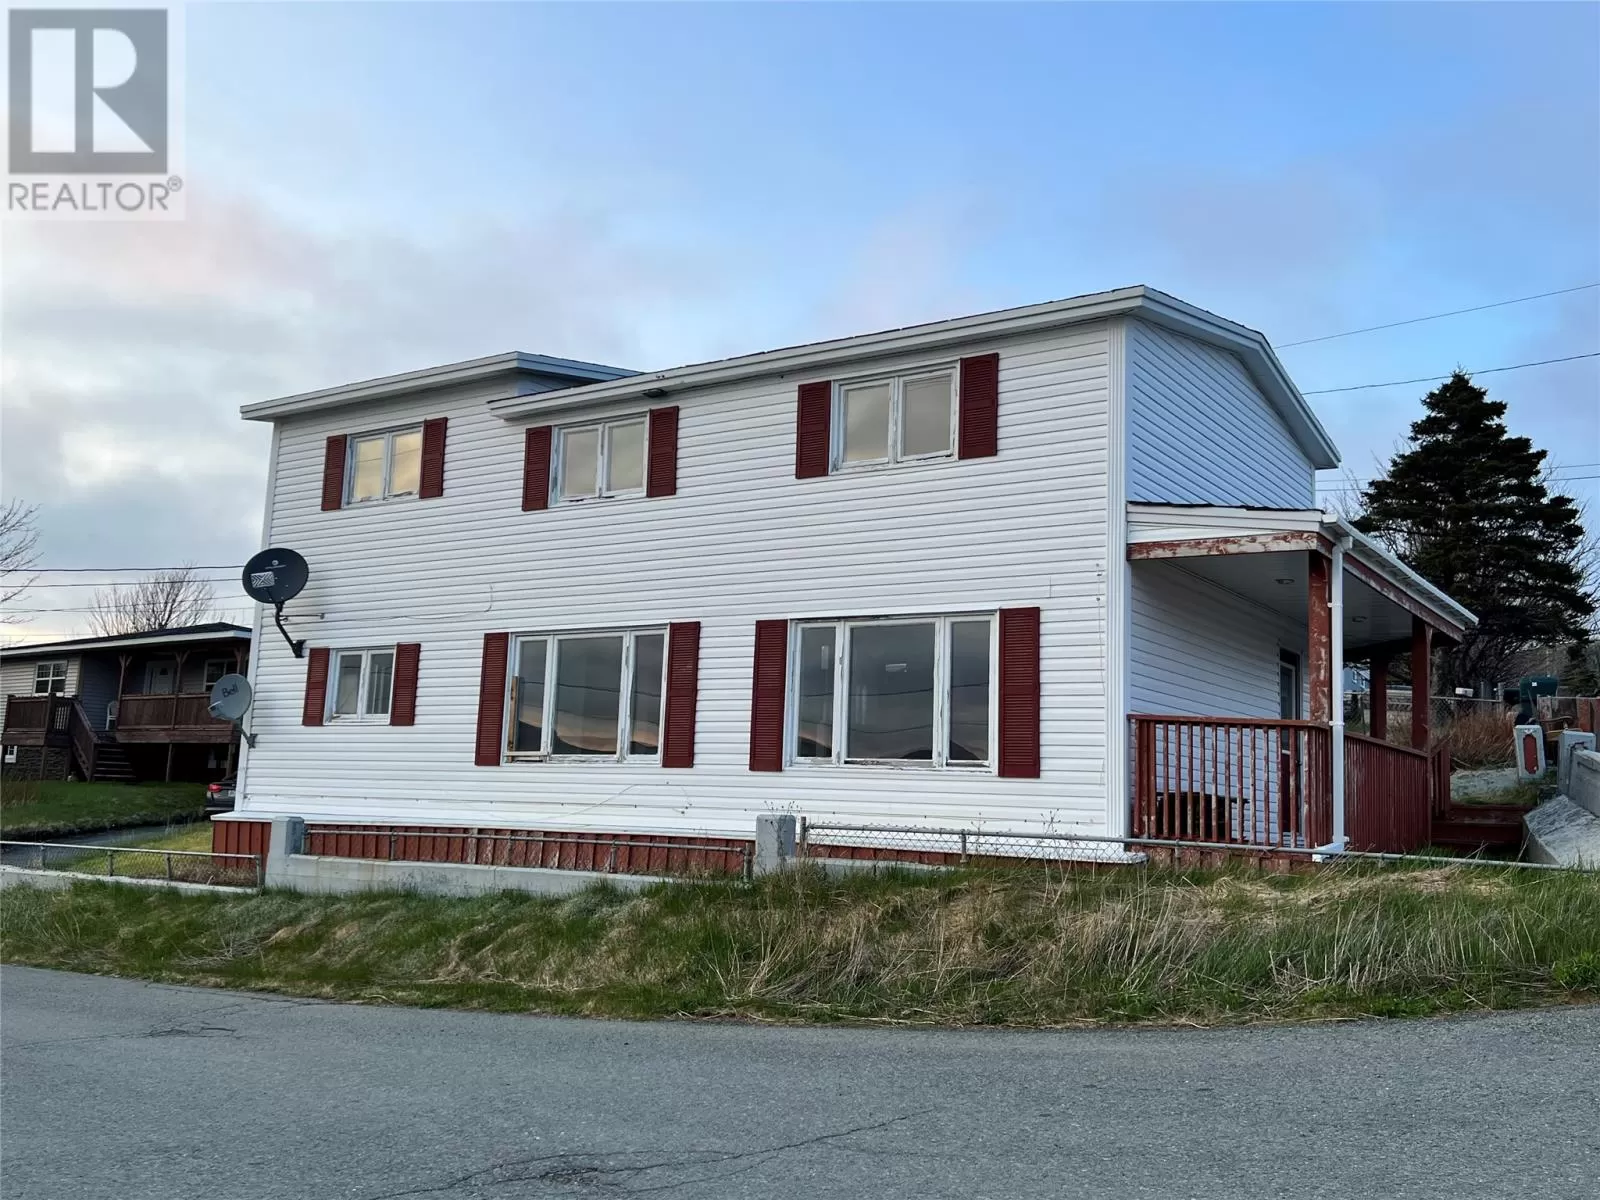 House for rent: 28 Bareneed Road, Bareneed, Newfoundland & Labrador A0A 1W0